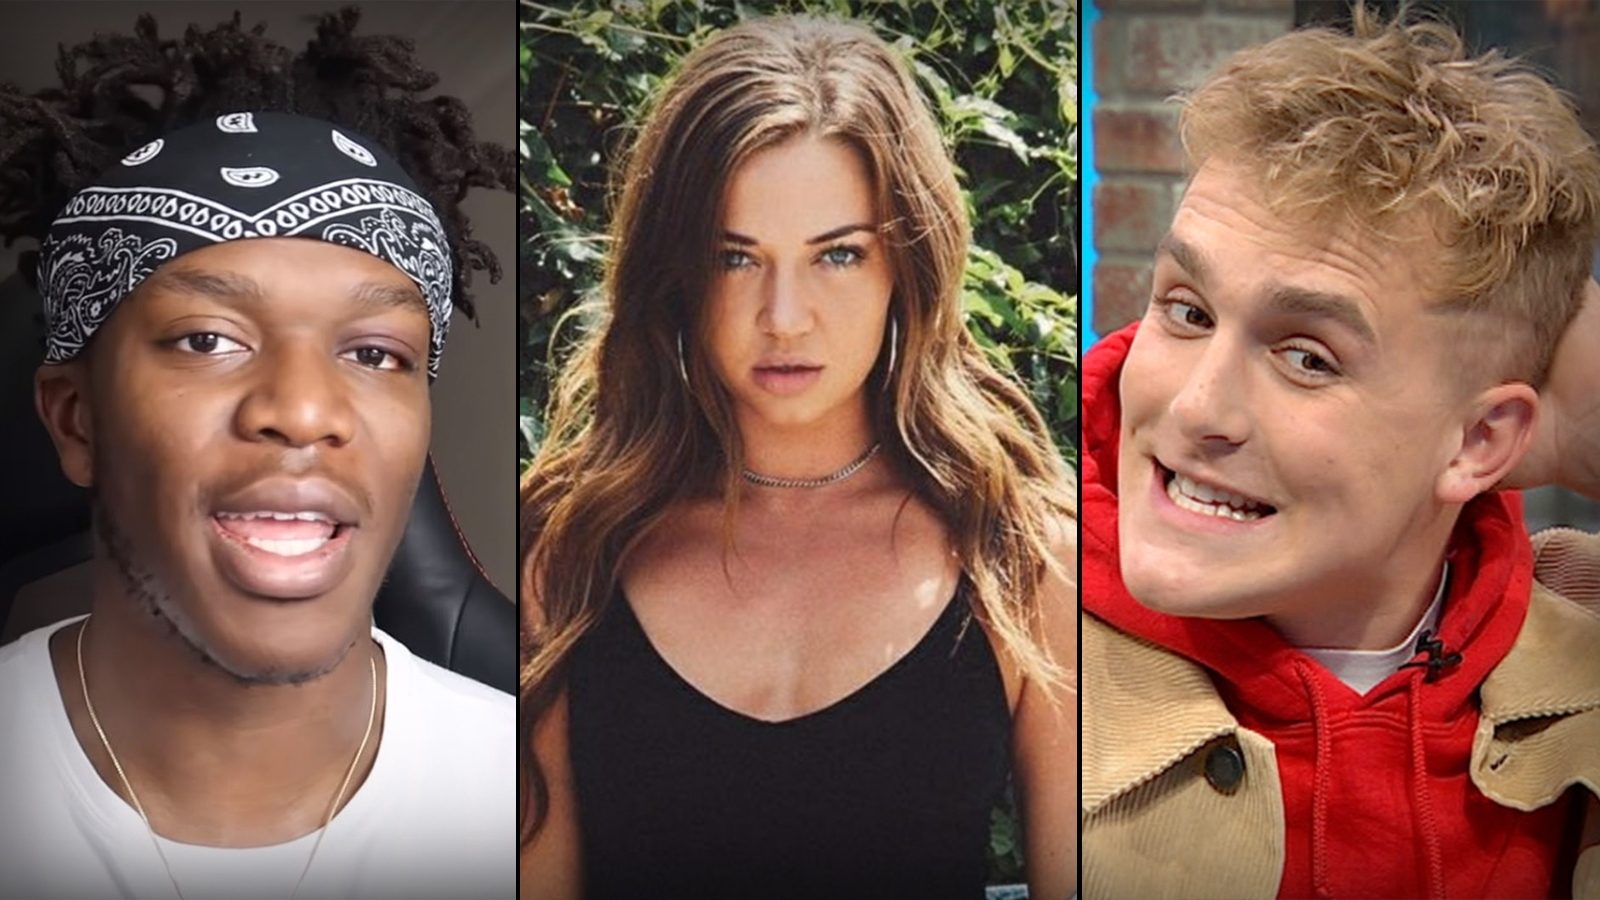 Is KSI making moves on Erika Costell after her breakup with Jake